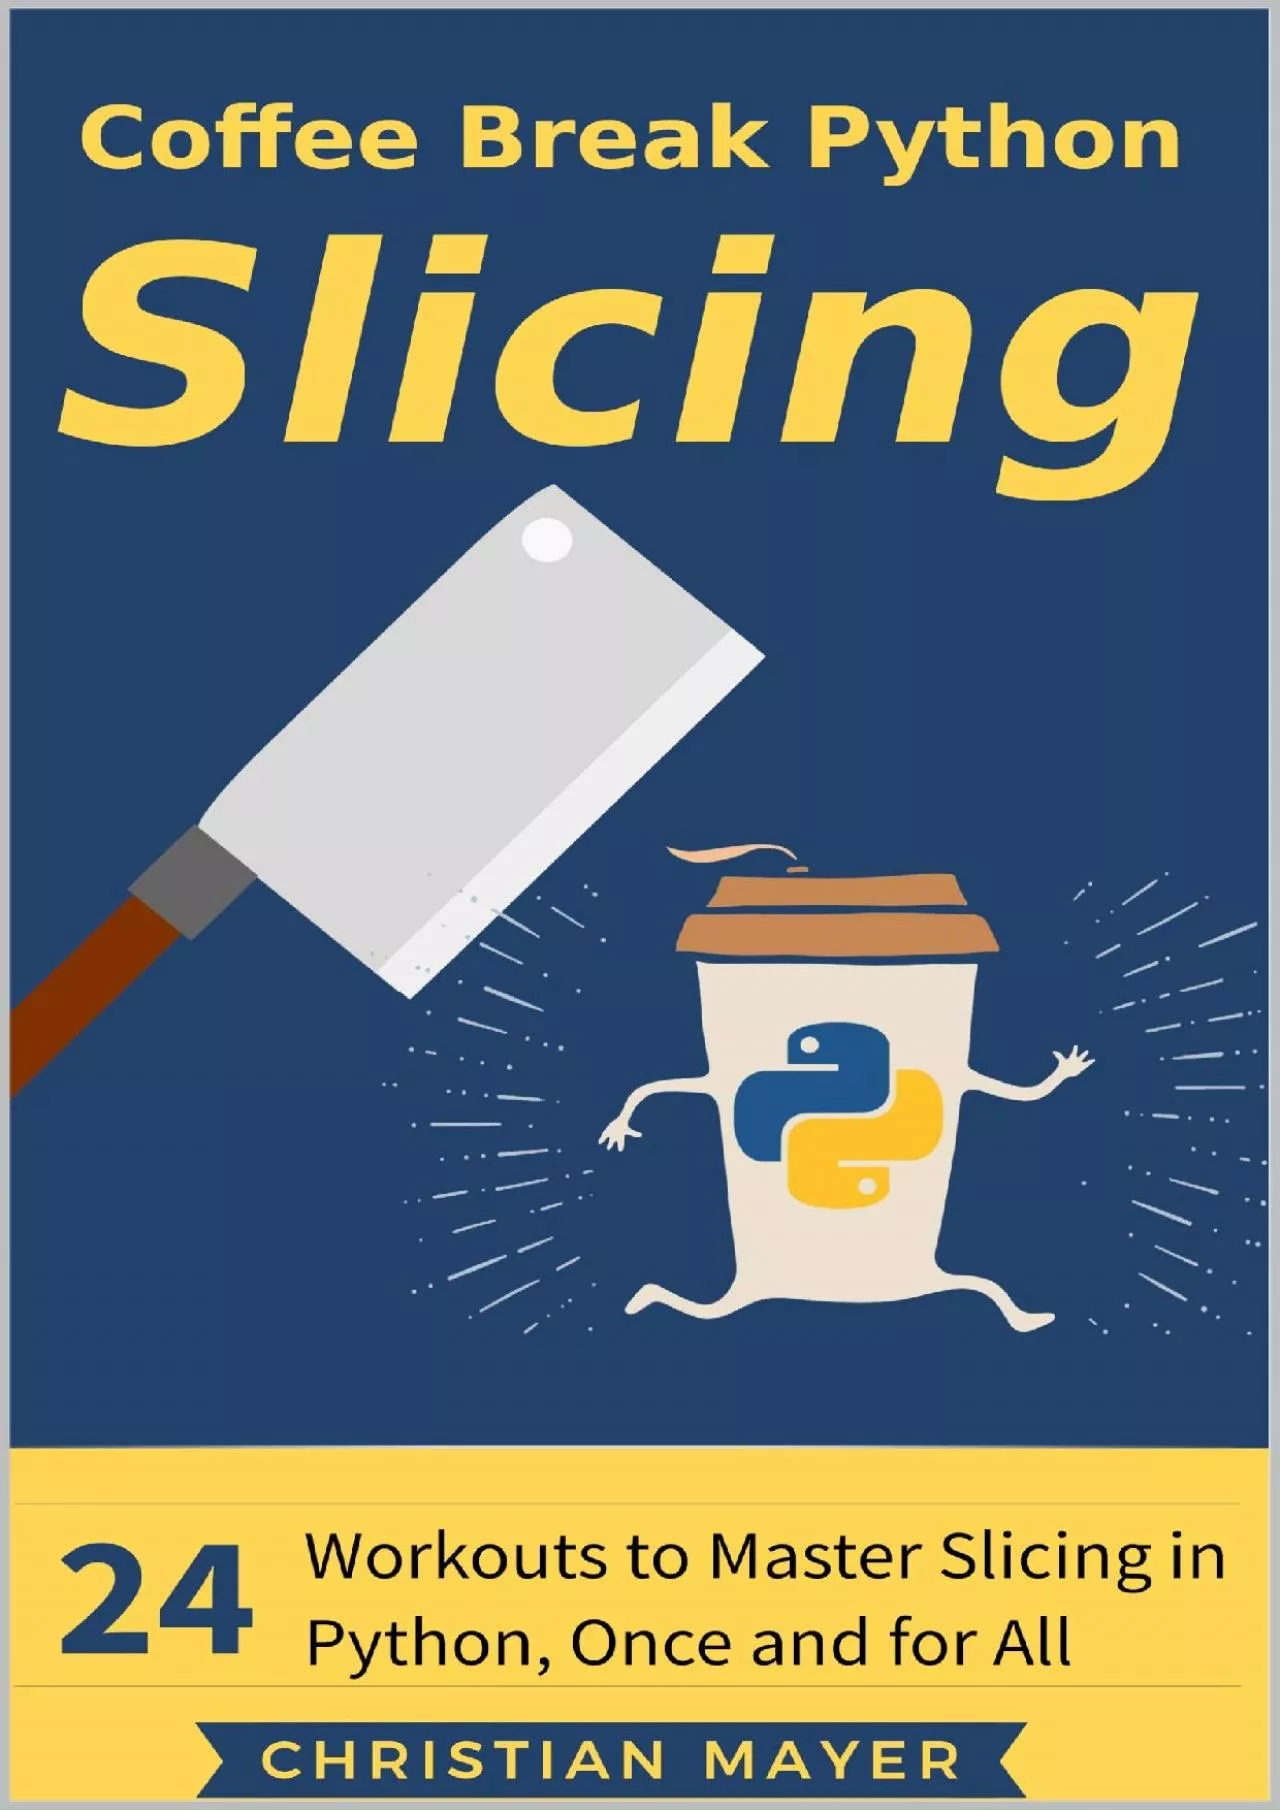 [FREE]-Coffee Break Python Slicing 24 Workouts to Master Slicing in Python, Once and for